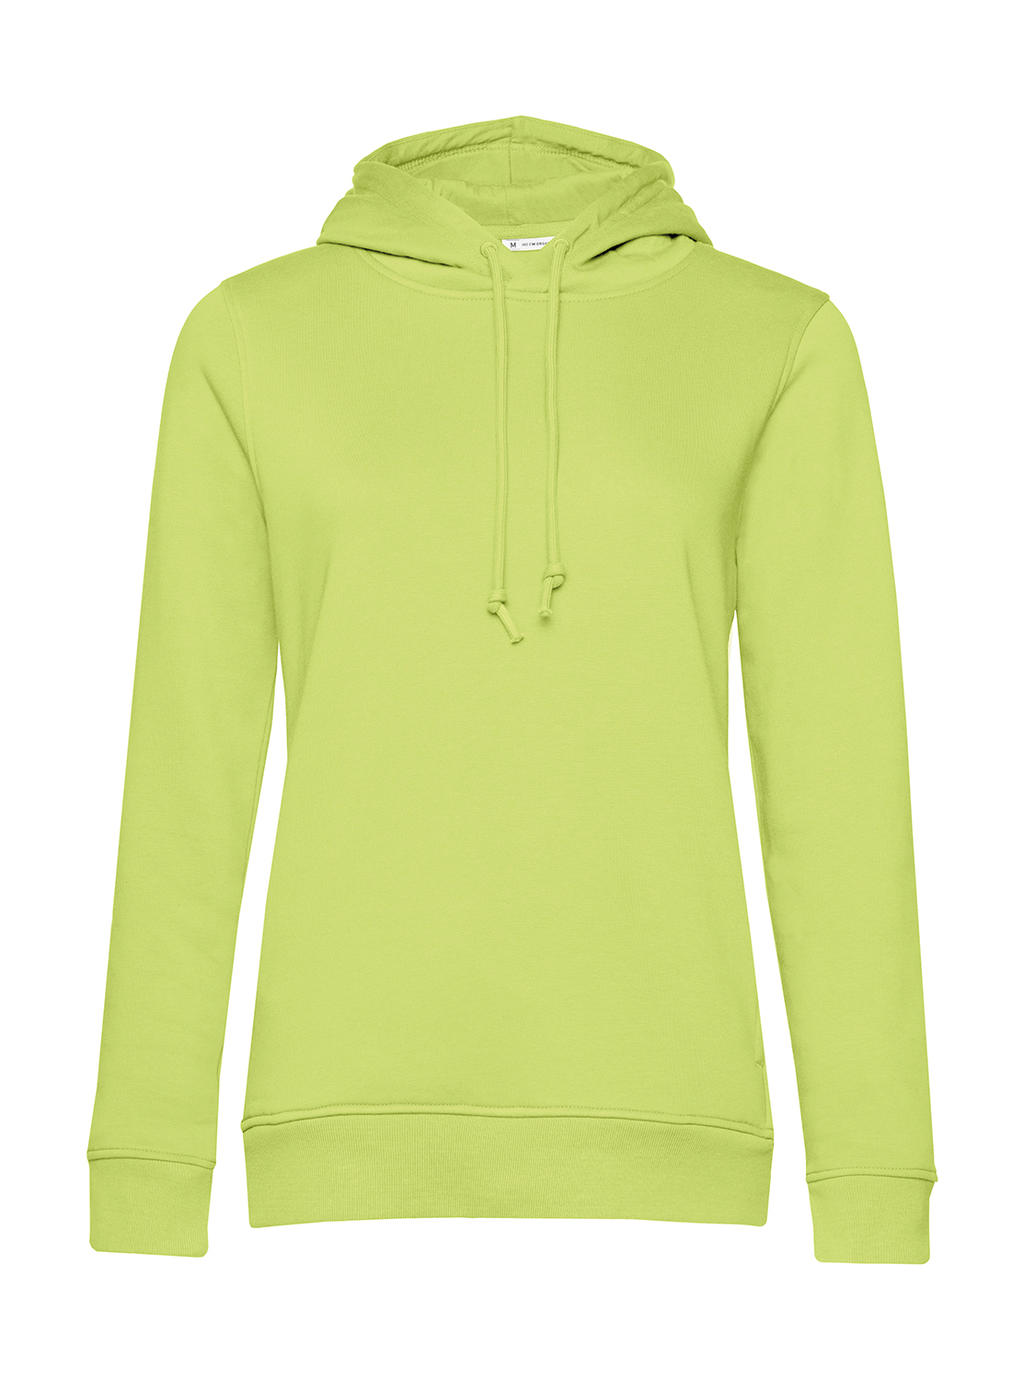  Organic Inspire Hooded /women_? in Farbe Lime